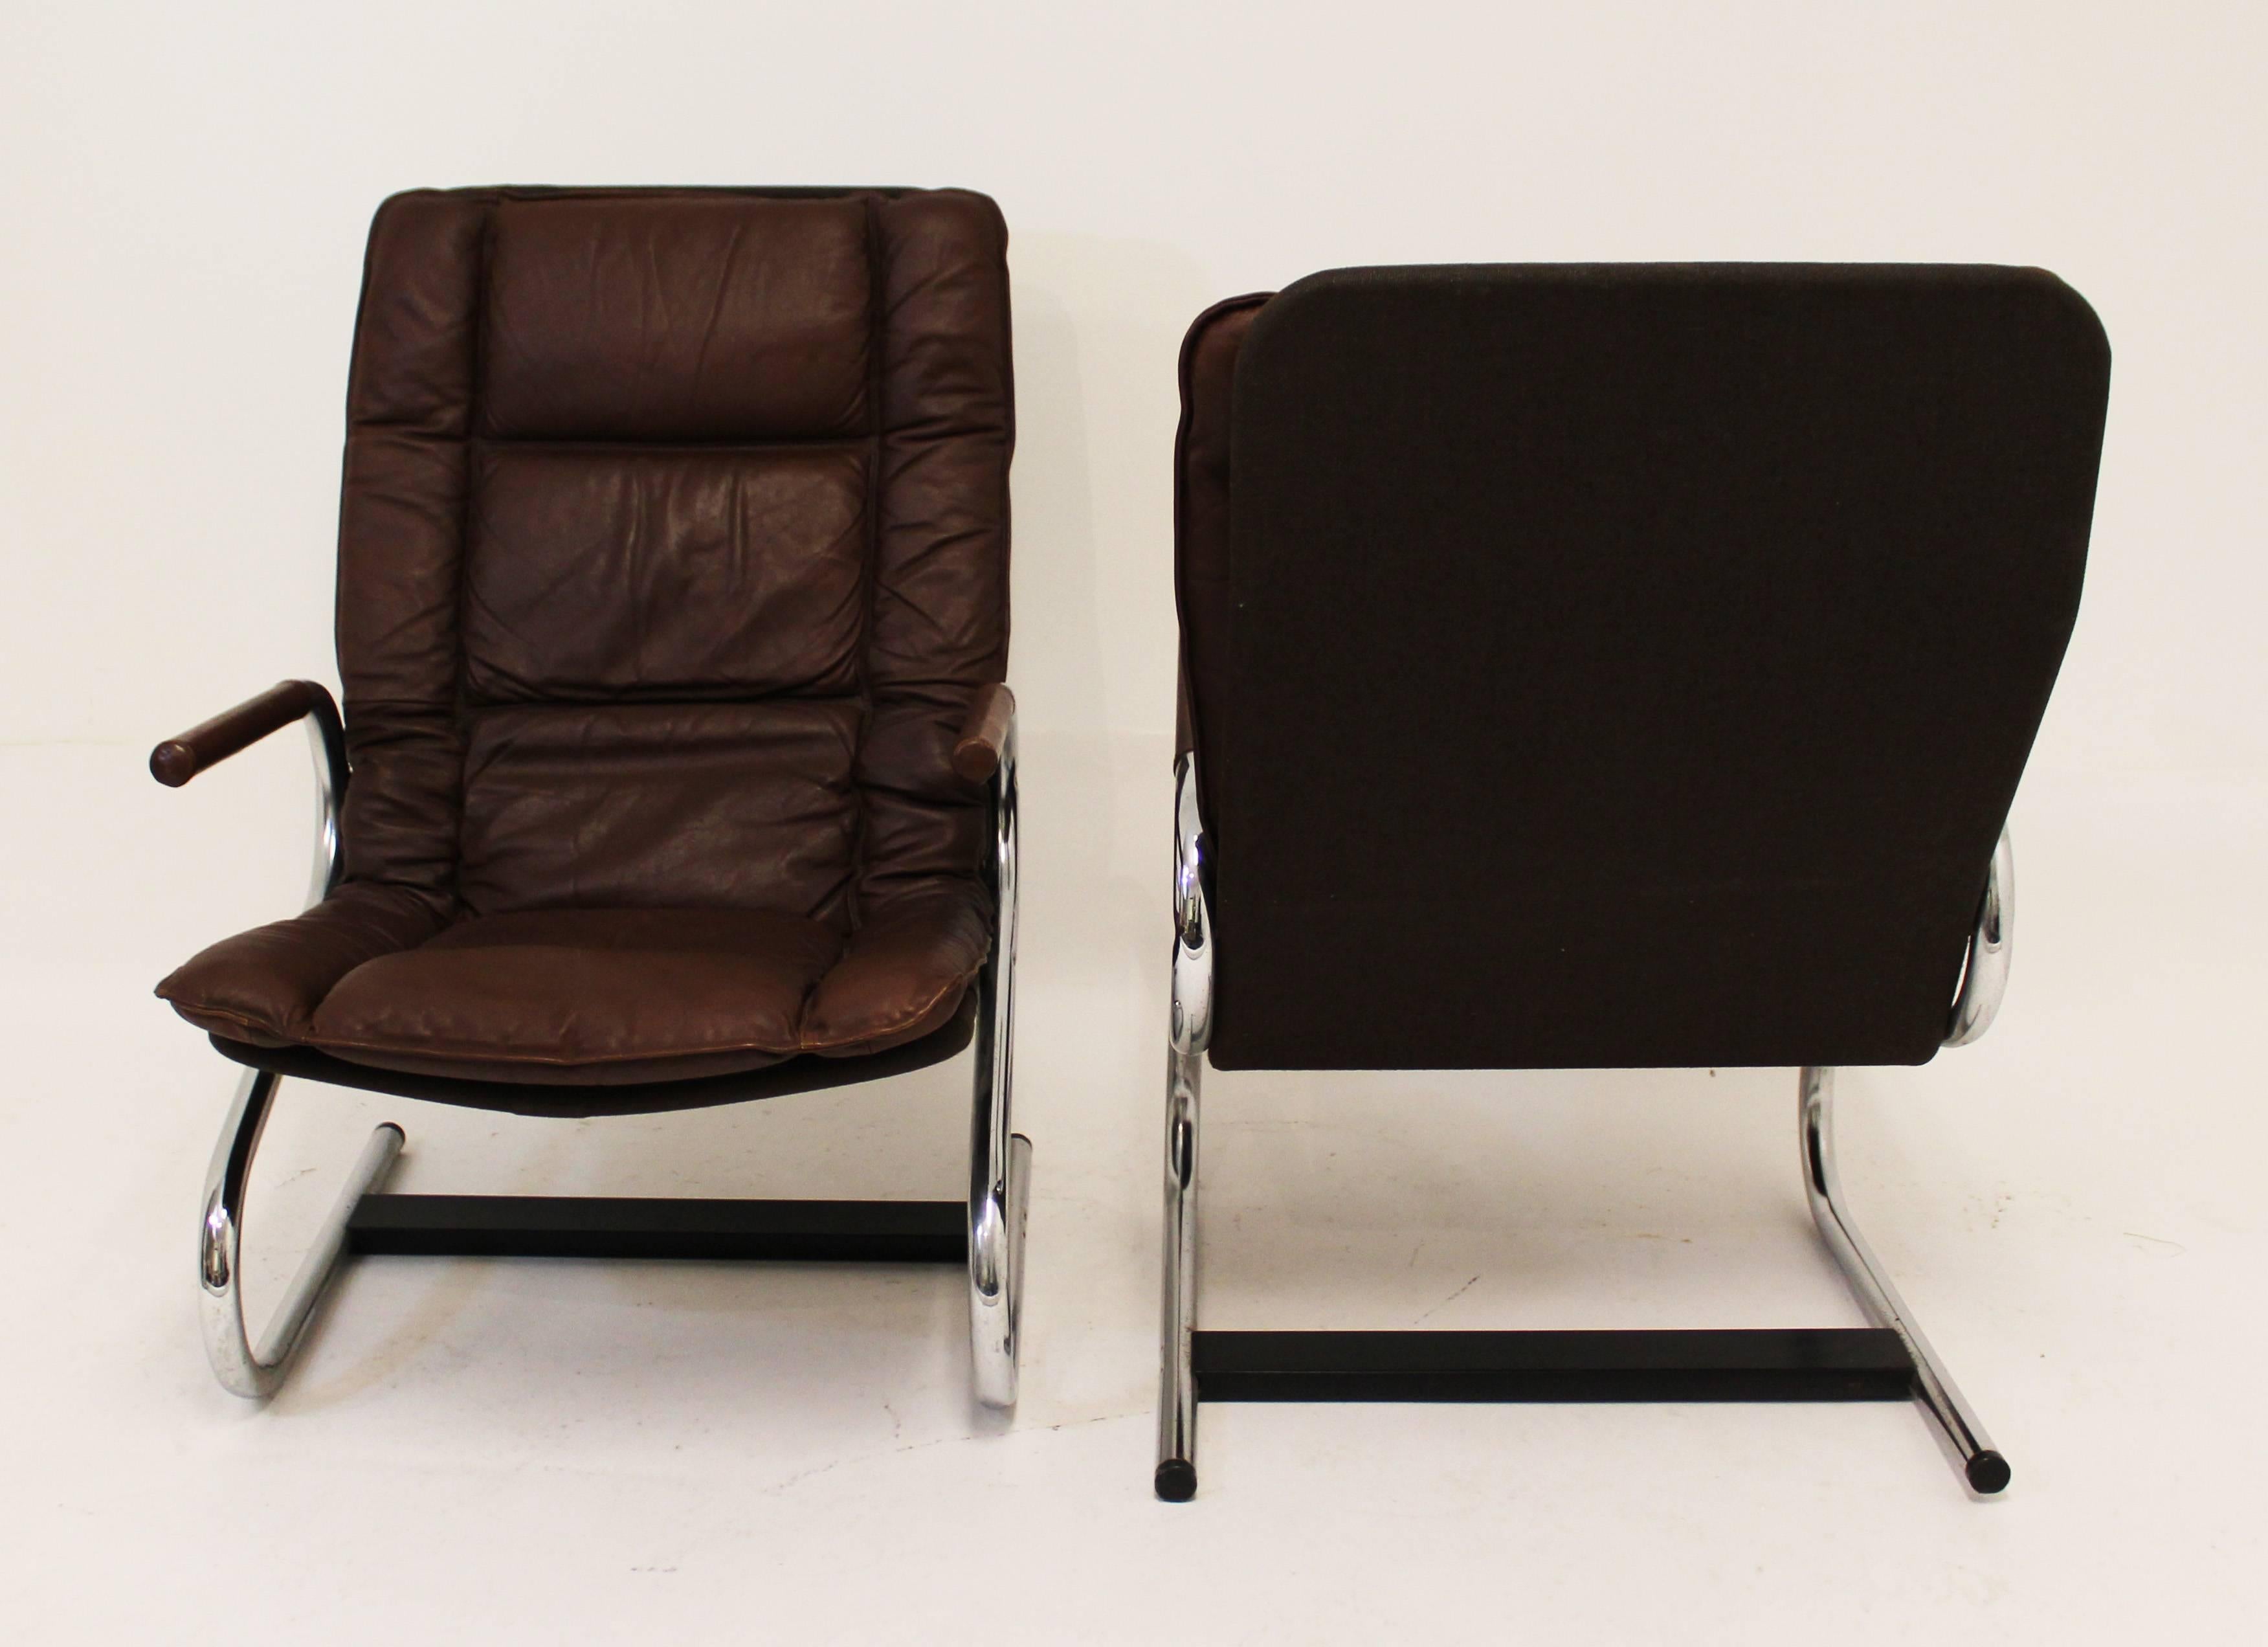 For your consideration is an elegant pair of brown leather and chrome lounge chairs and ottomans by Ingmar Relling for Westnofa in Norway. In excellent condition. The dimensions of the chairs are 24